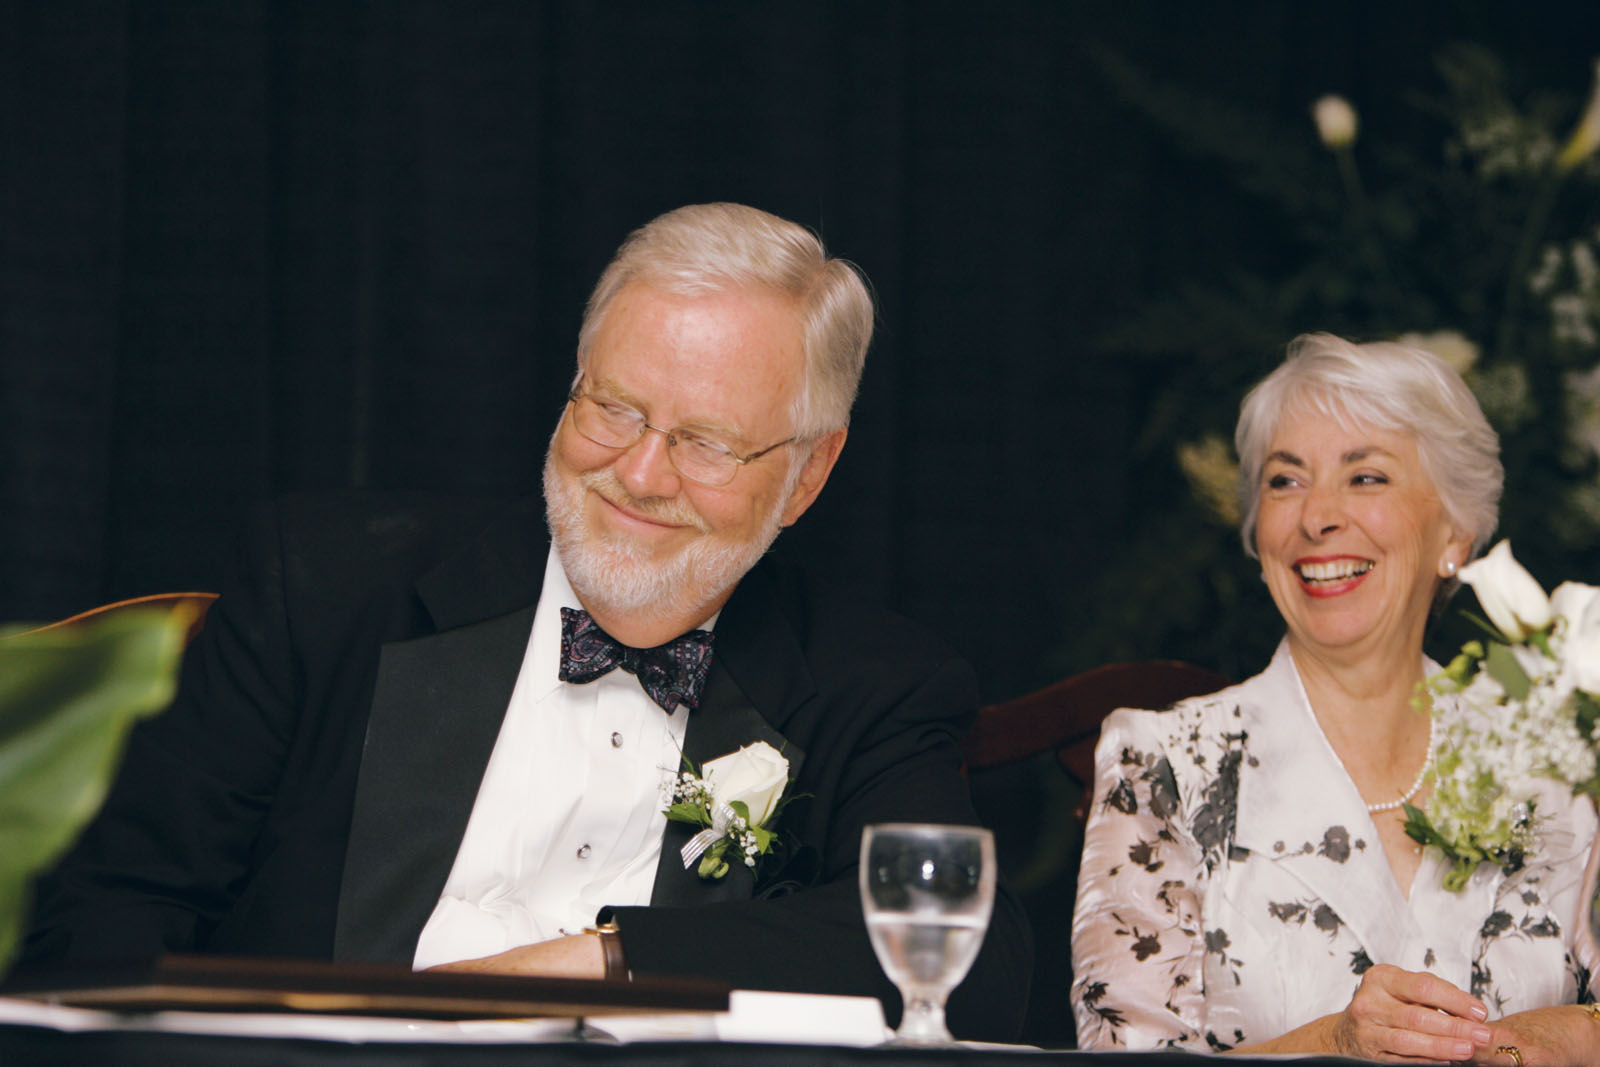 President Hubbard and his wife, Aleta, were targets of a light-hearted roast at a celebration marking the couple's 20th anniversary at Northwest.